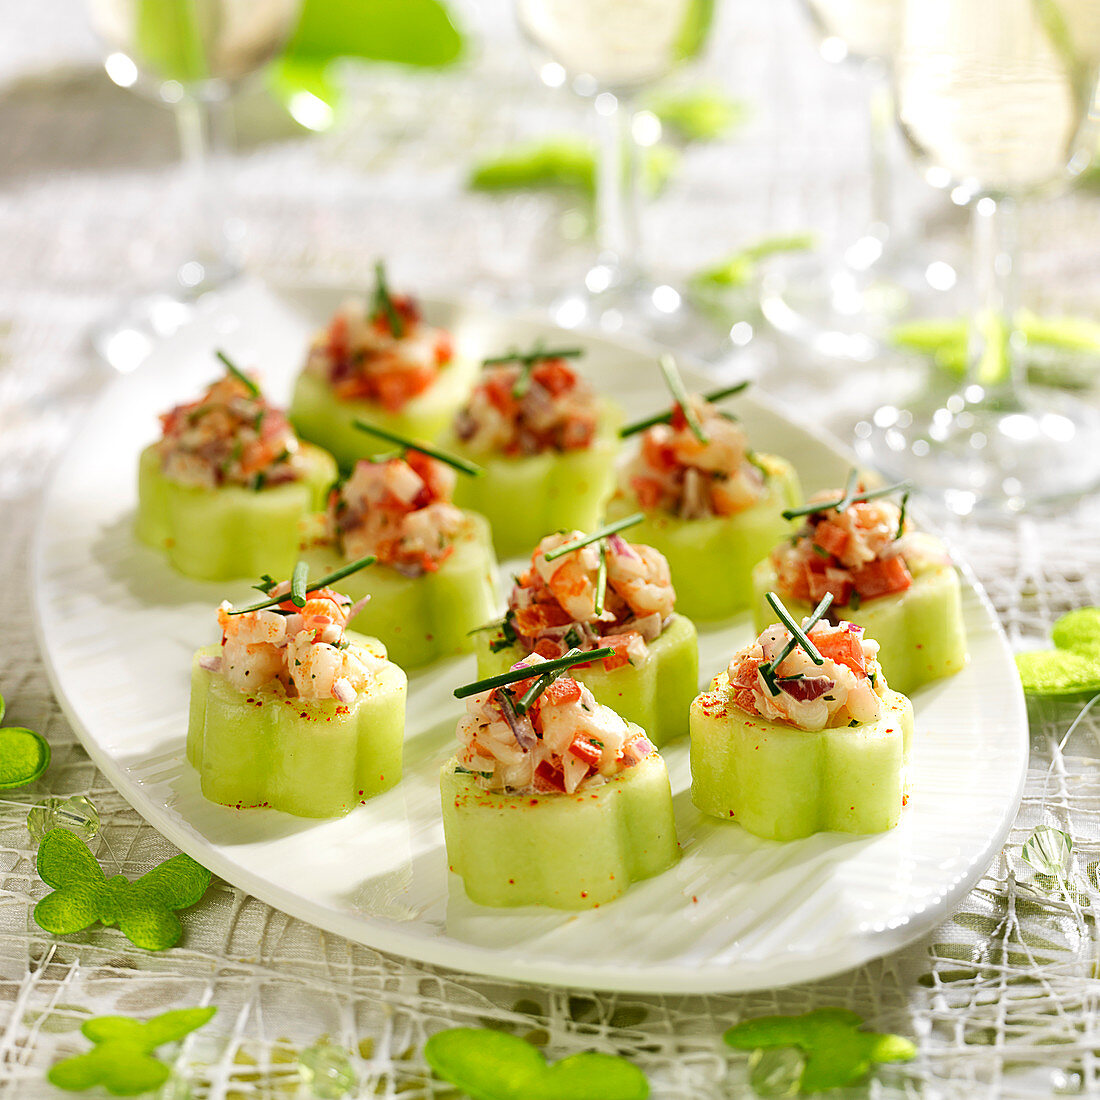 Cucumber flowers and shrimp appetizers